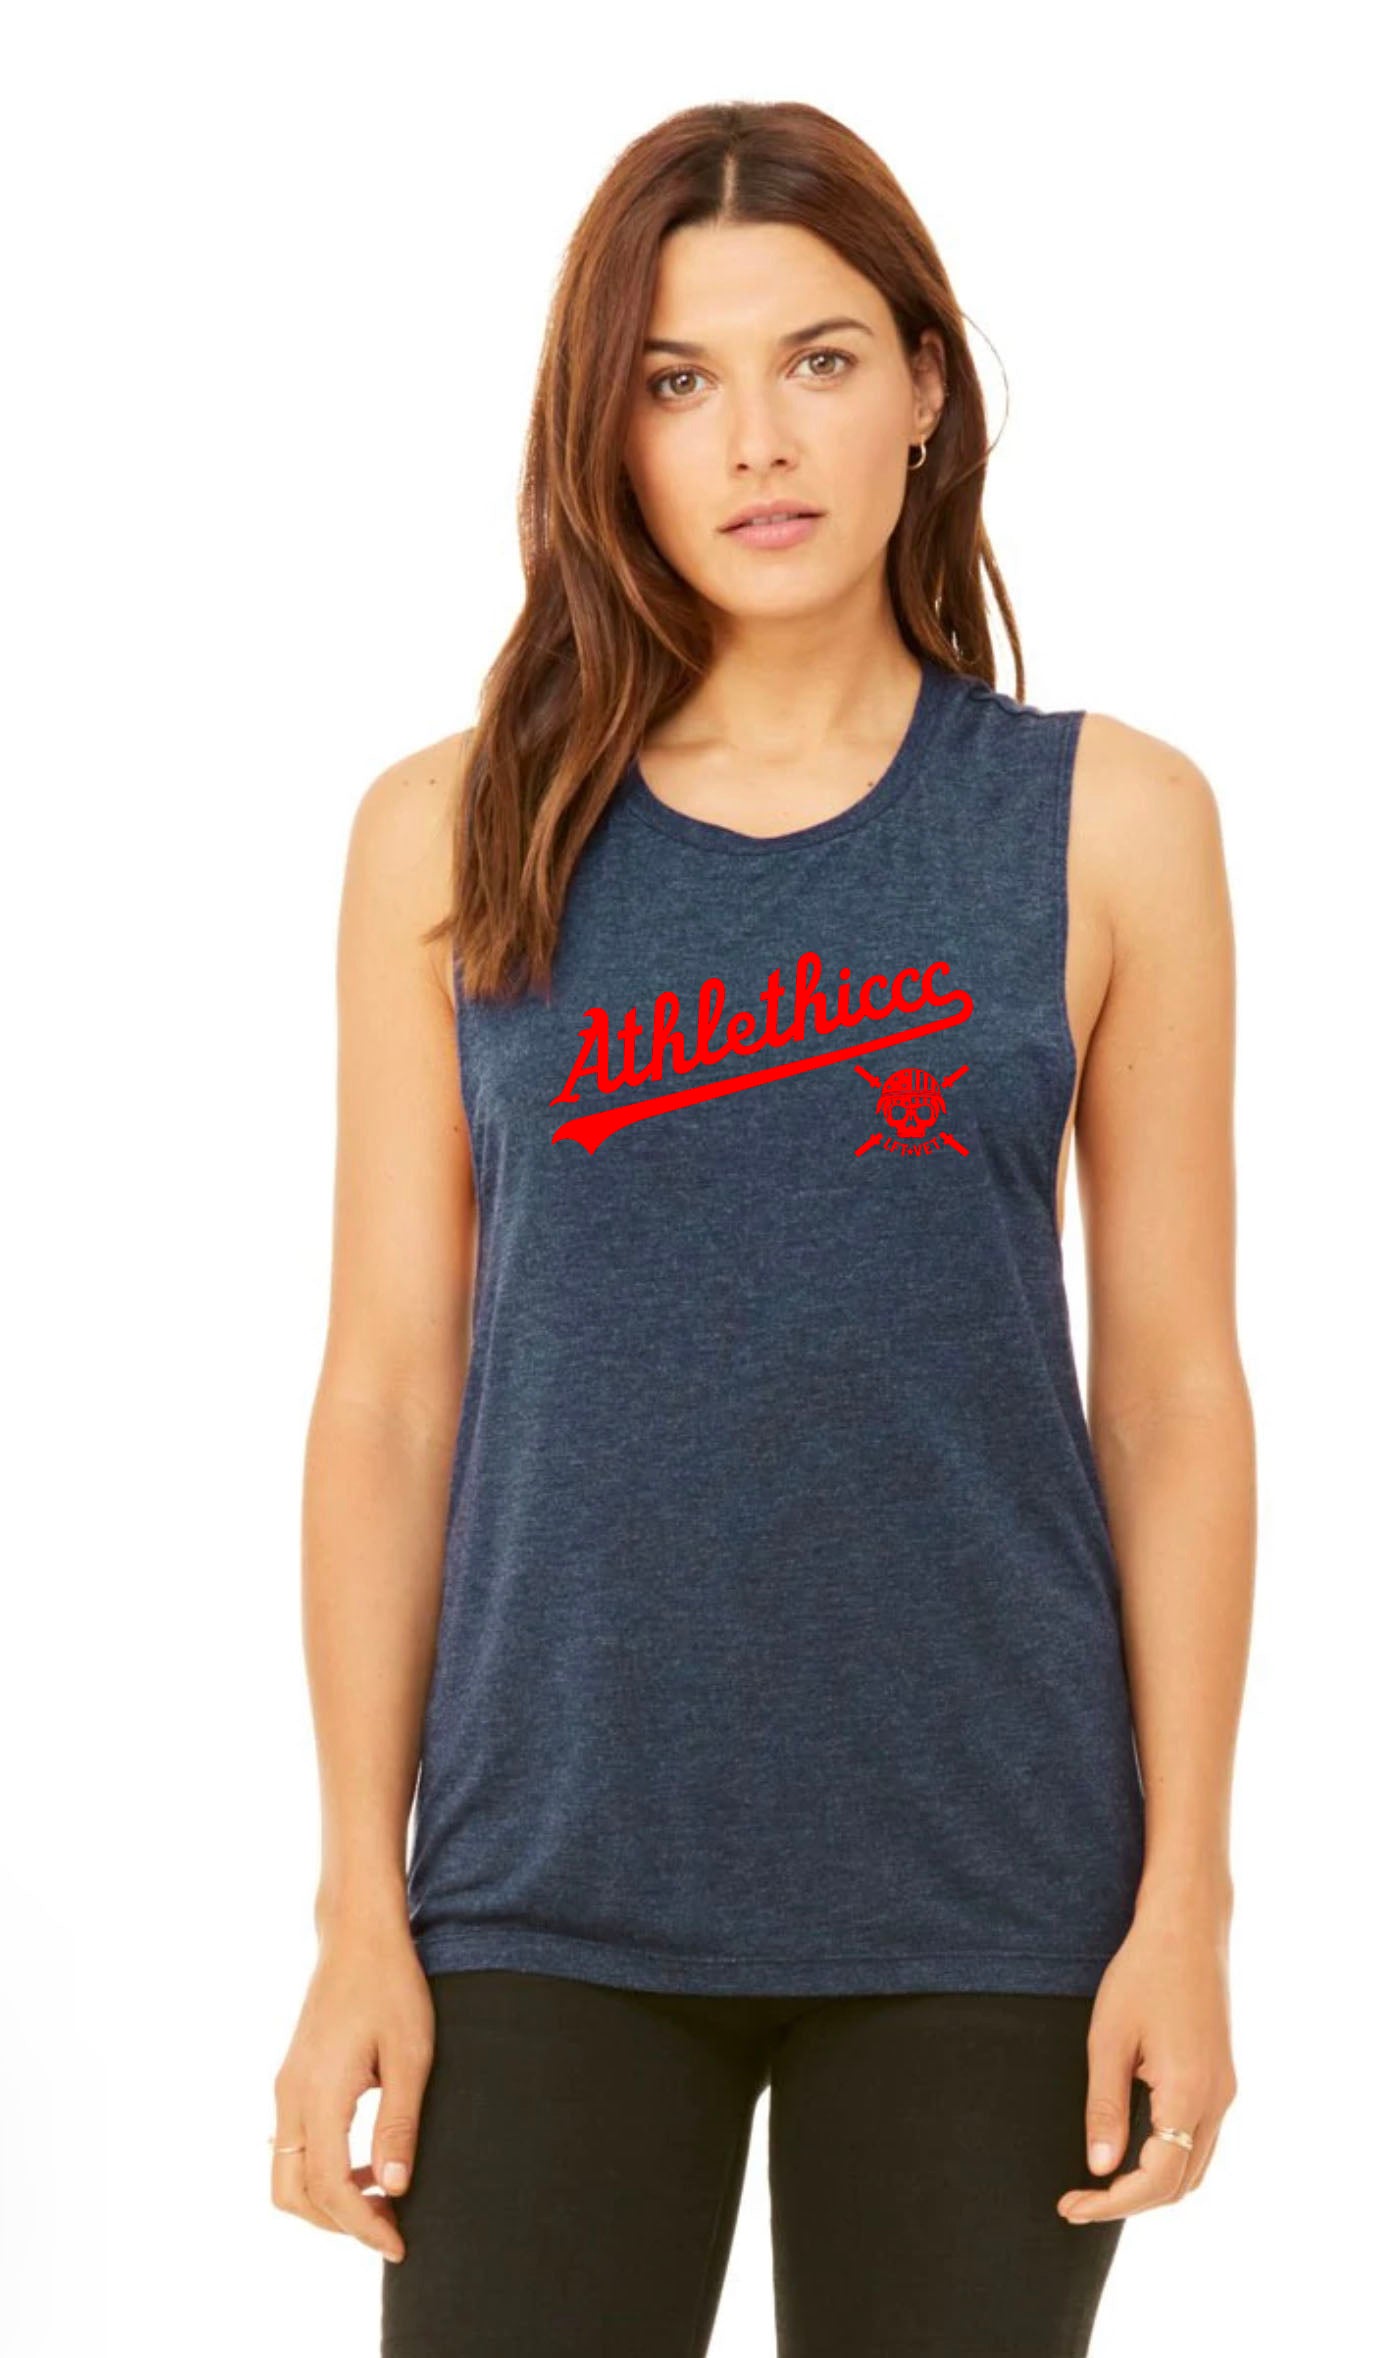 Athlethiccc Flowy Muscle Tank